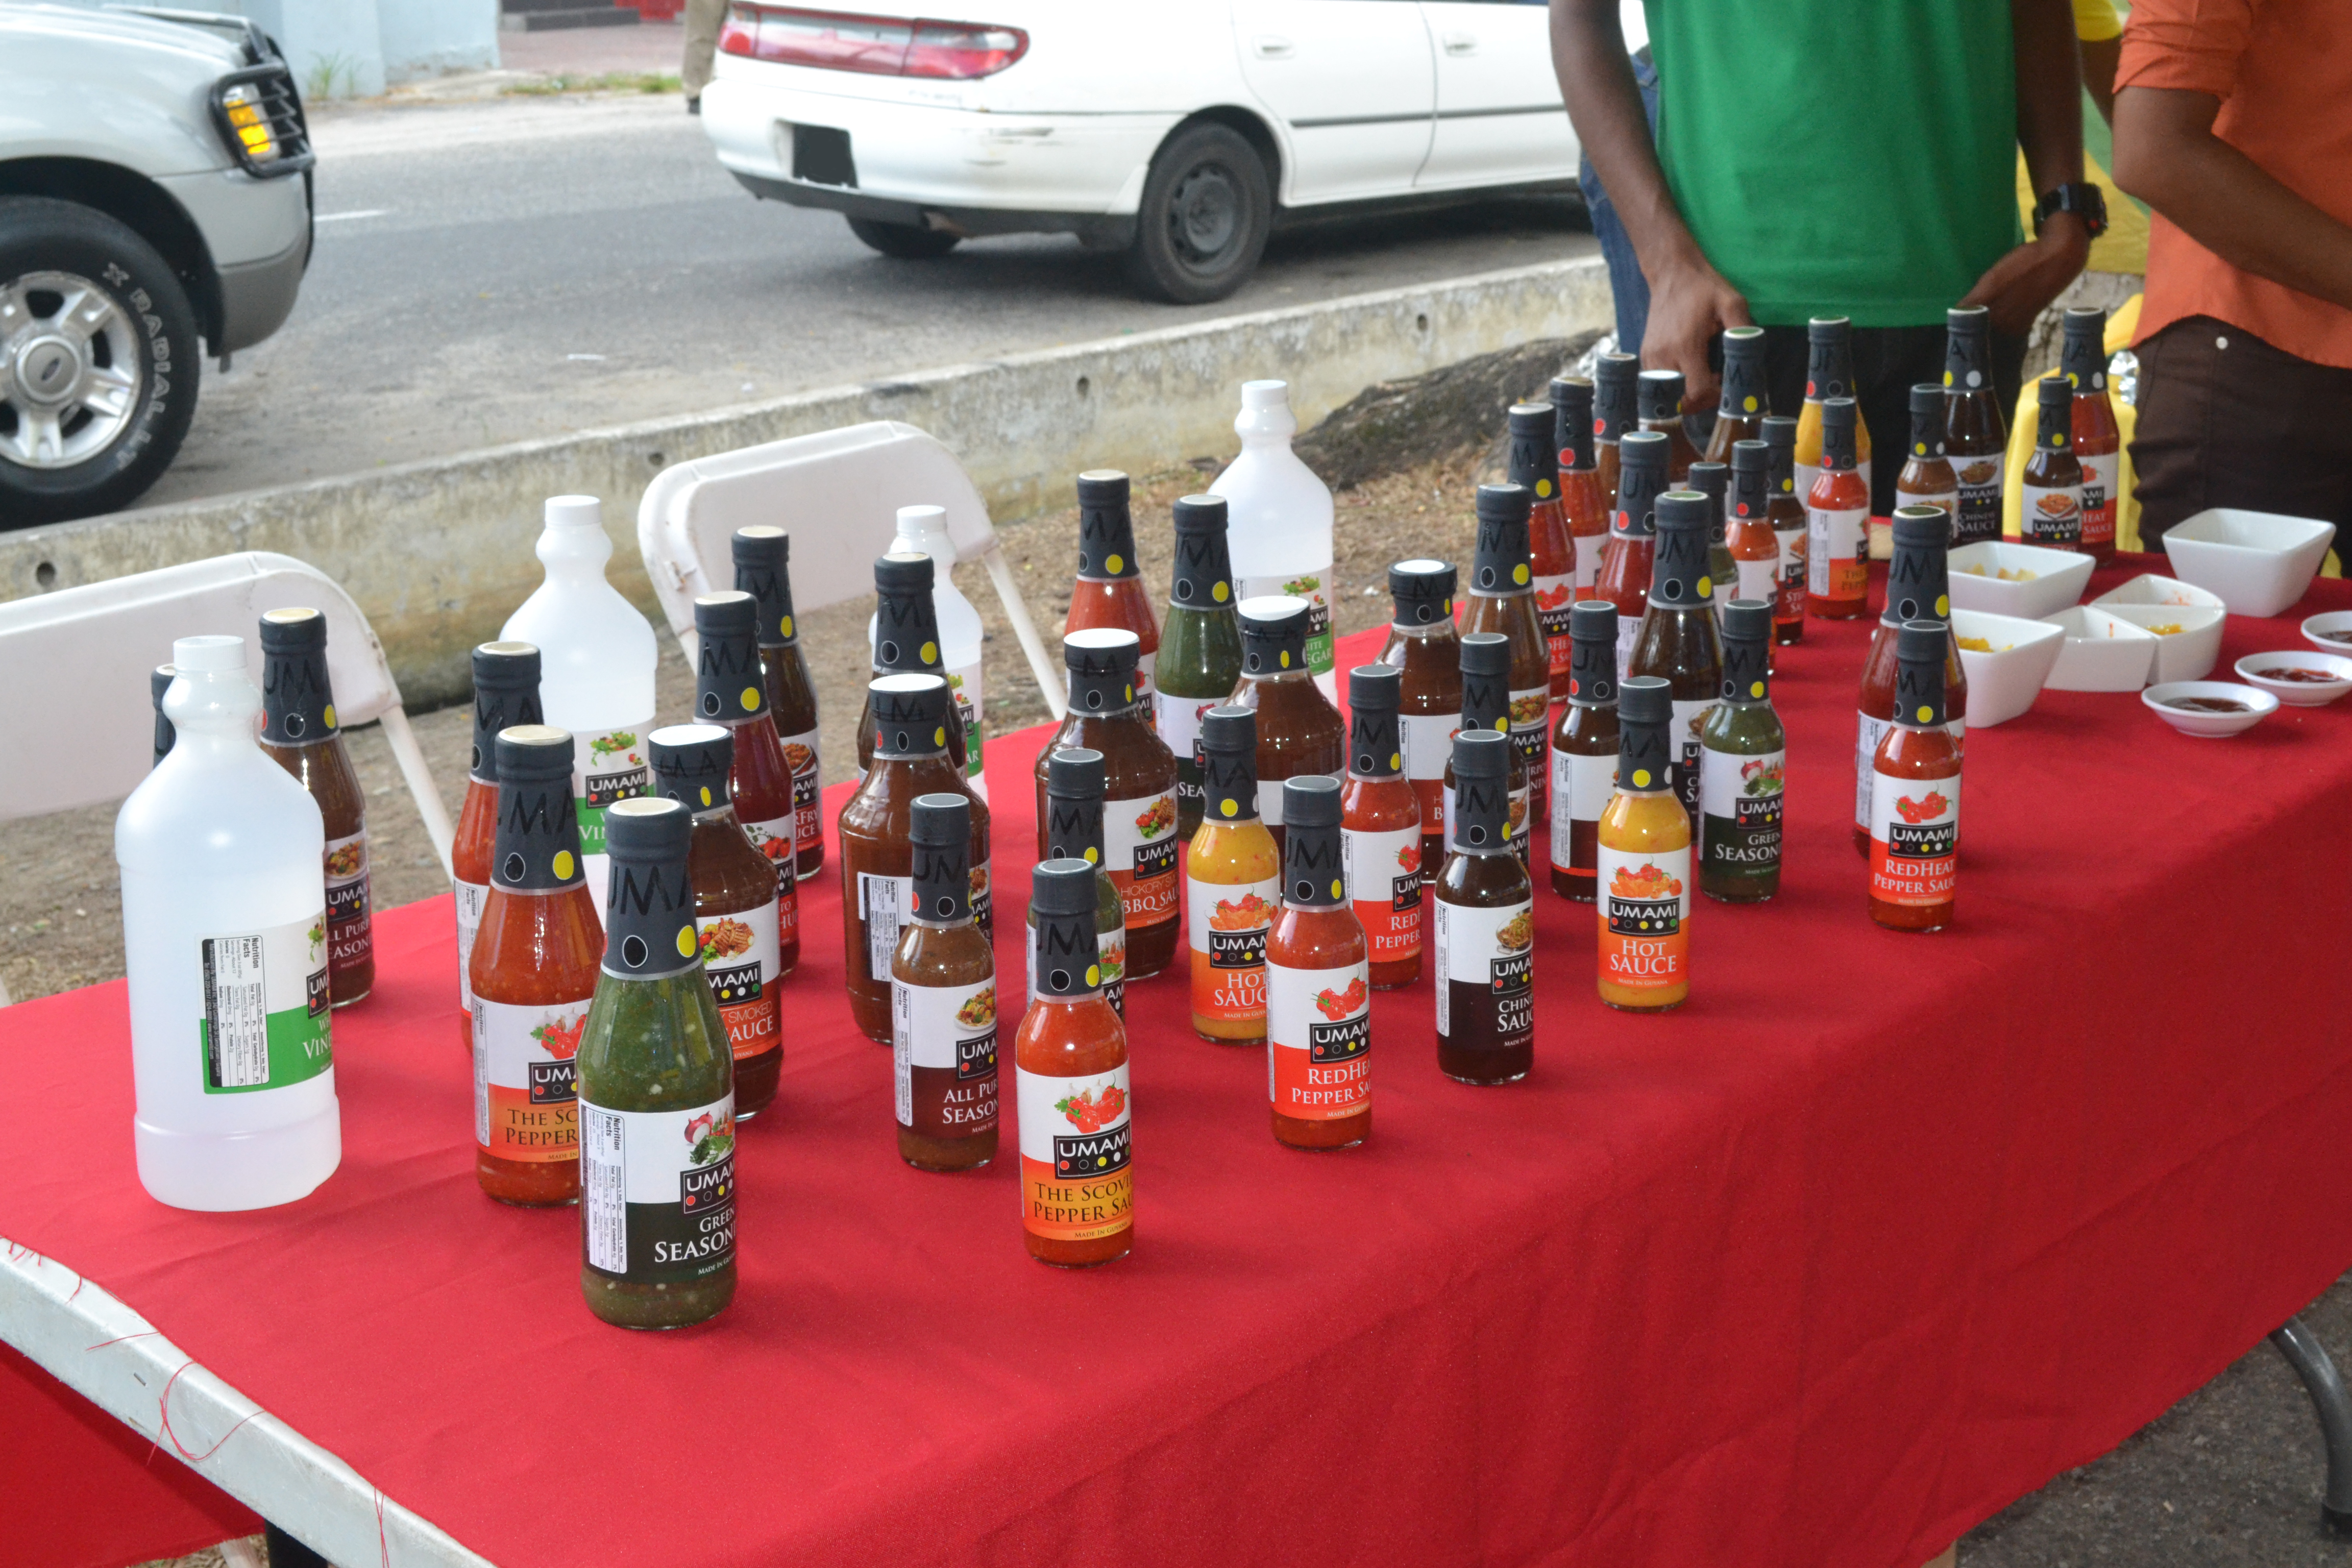 Locally produced sauces